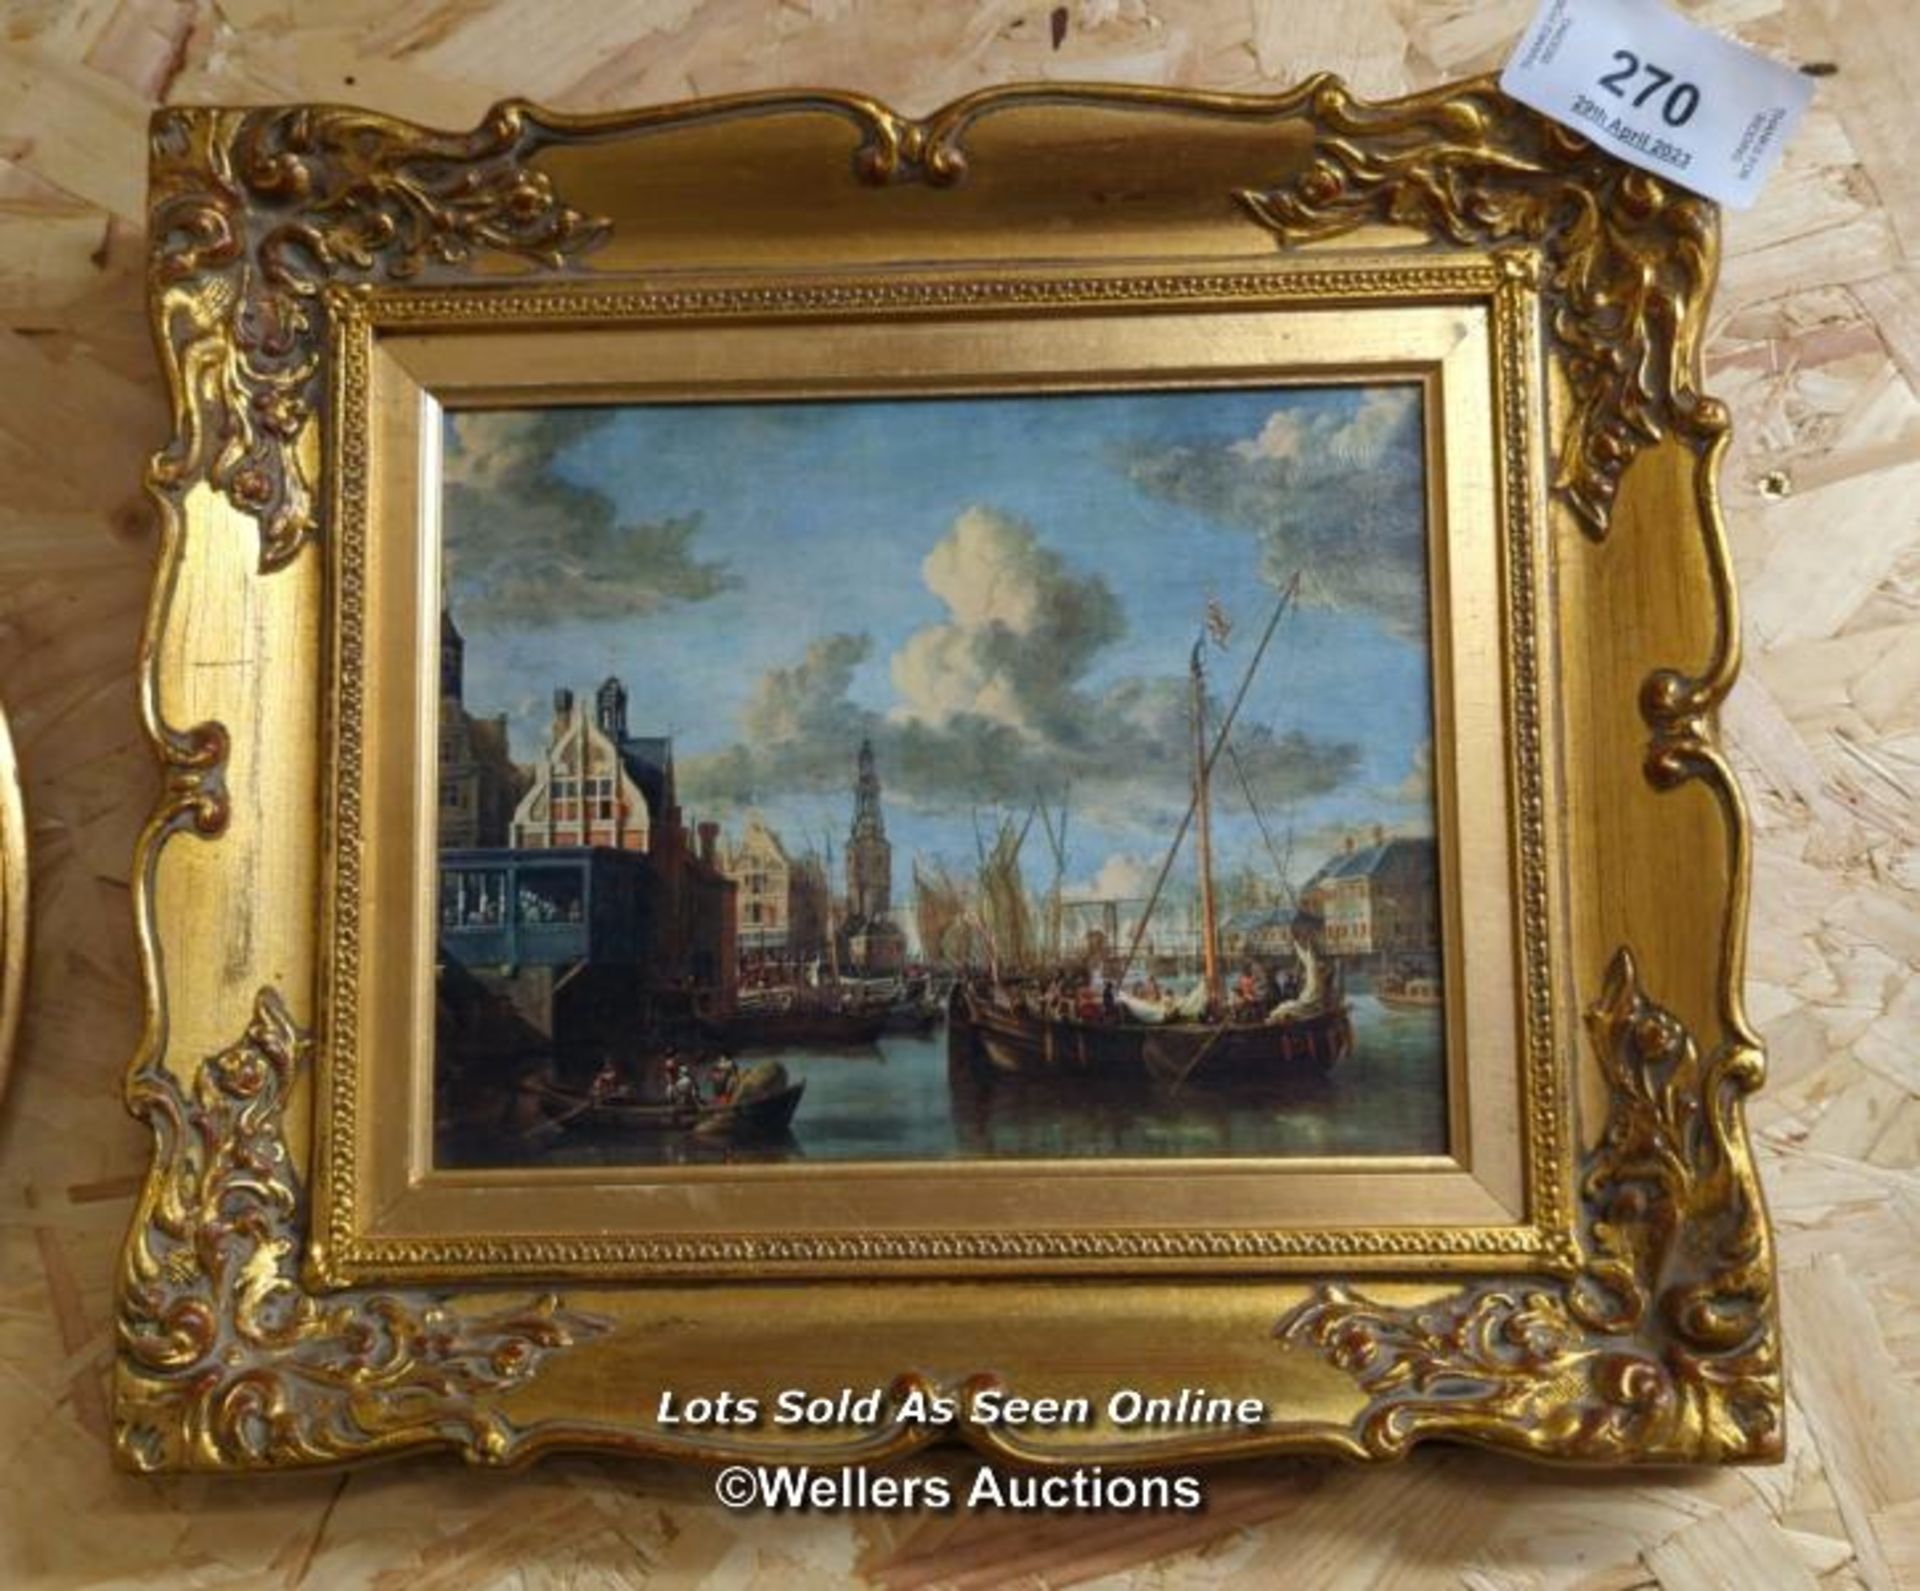 *GILT EDGE FRAME AND PAINTING DEPICTING HARBOUR SCENE, 15 X 12 / ALL LOTS ARE LOCATED AT AUTHENTIC